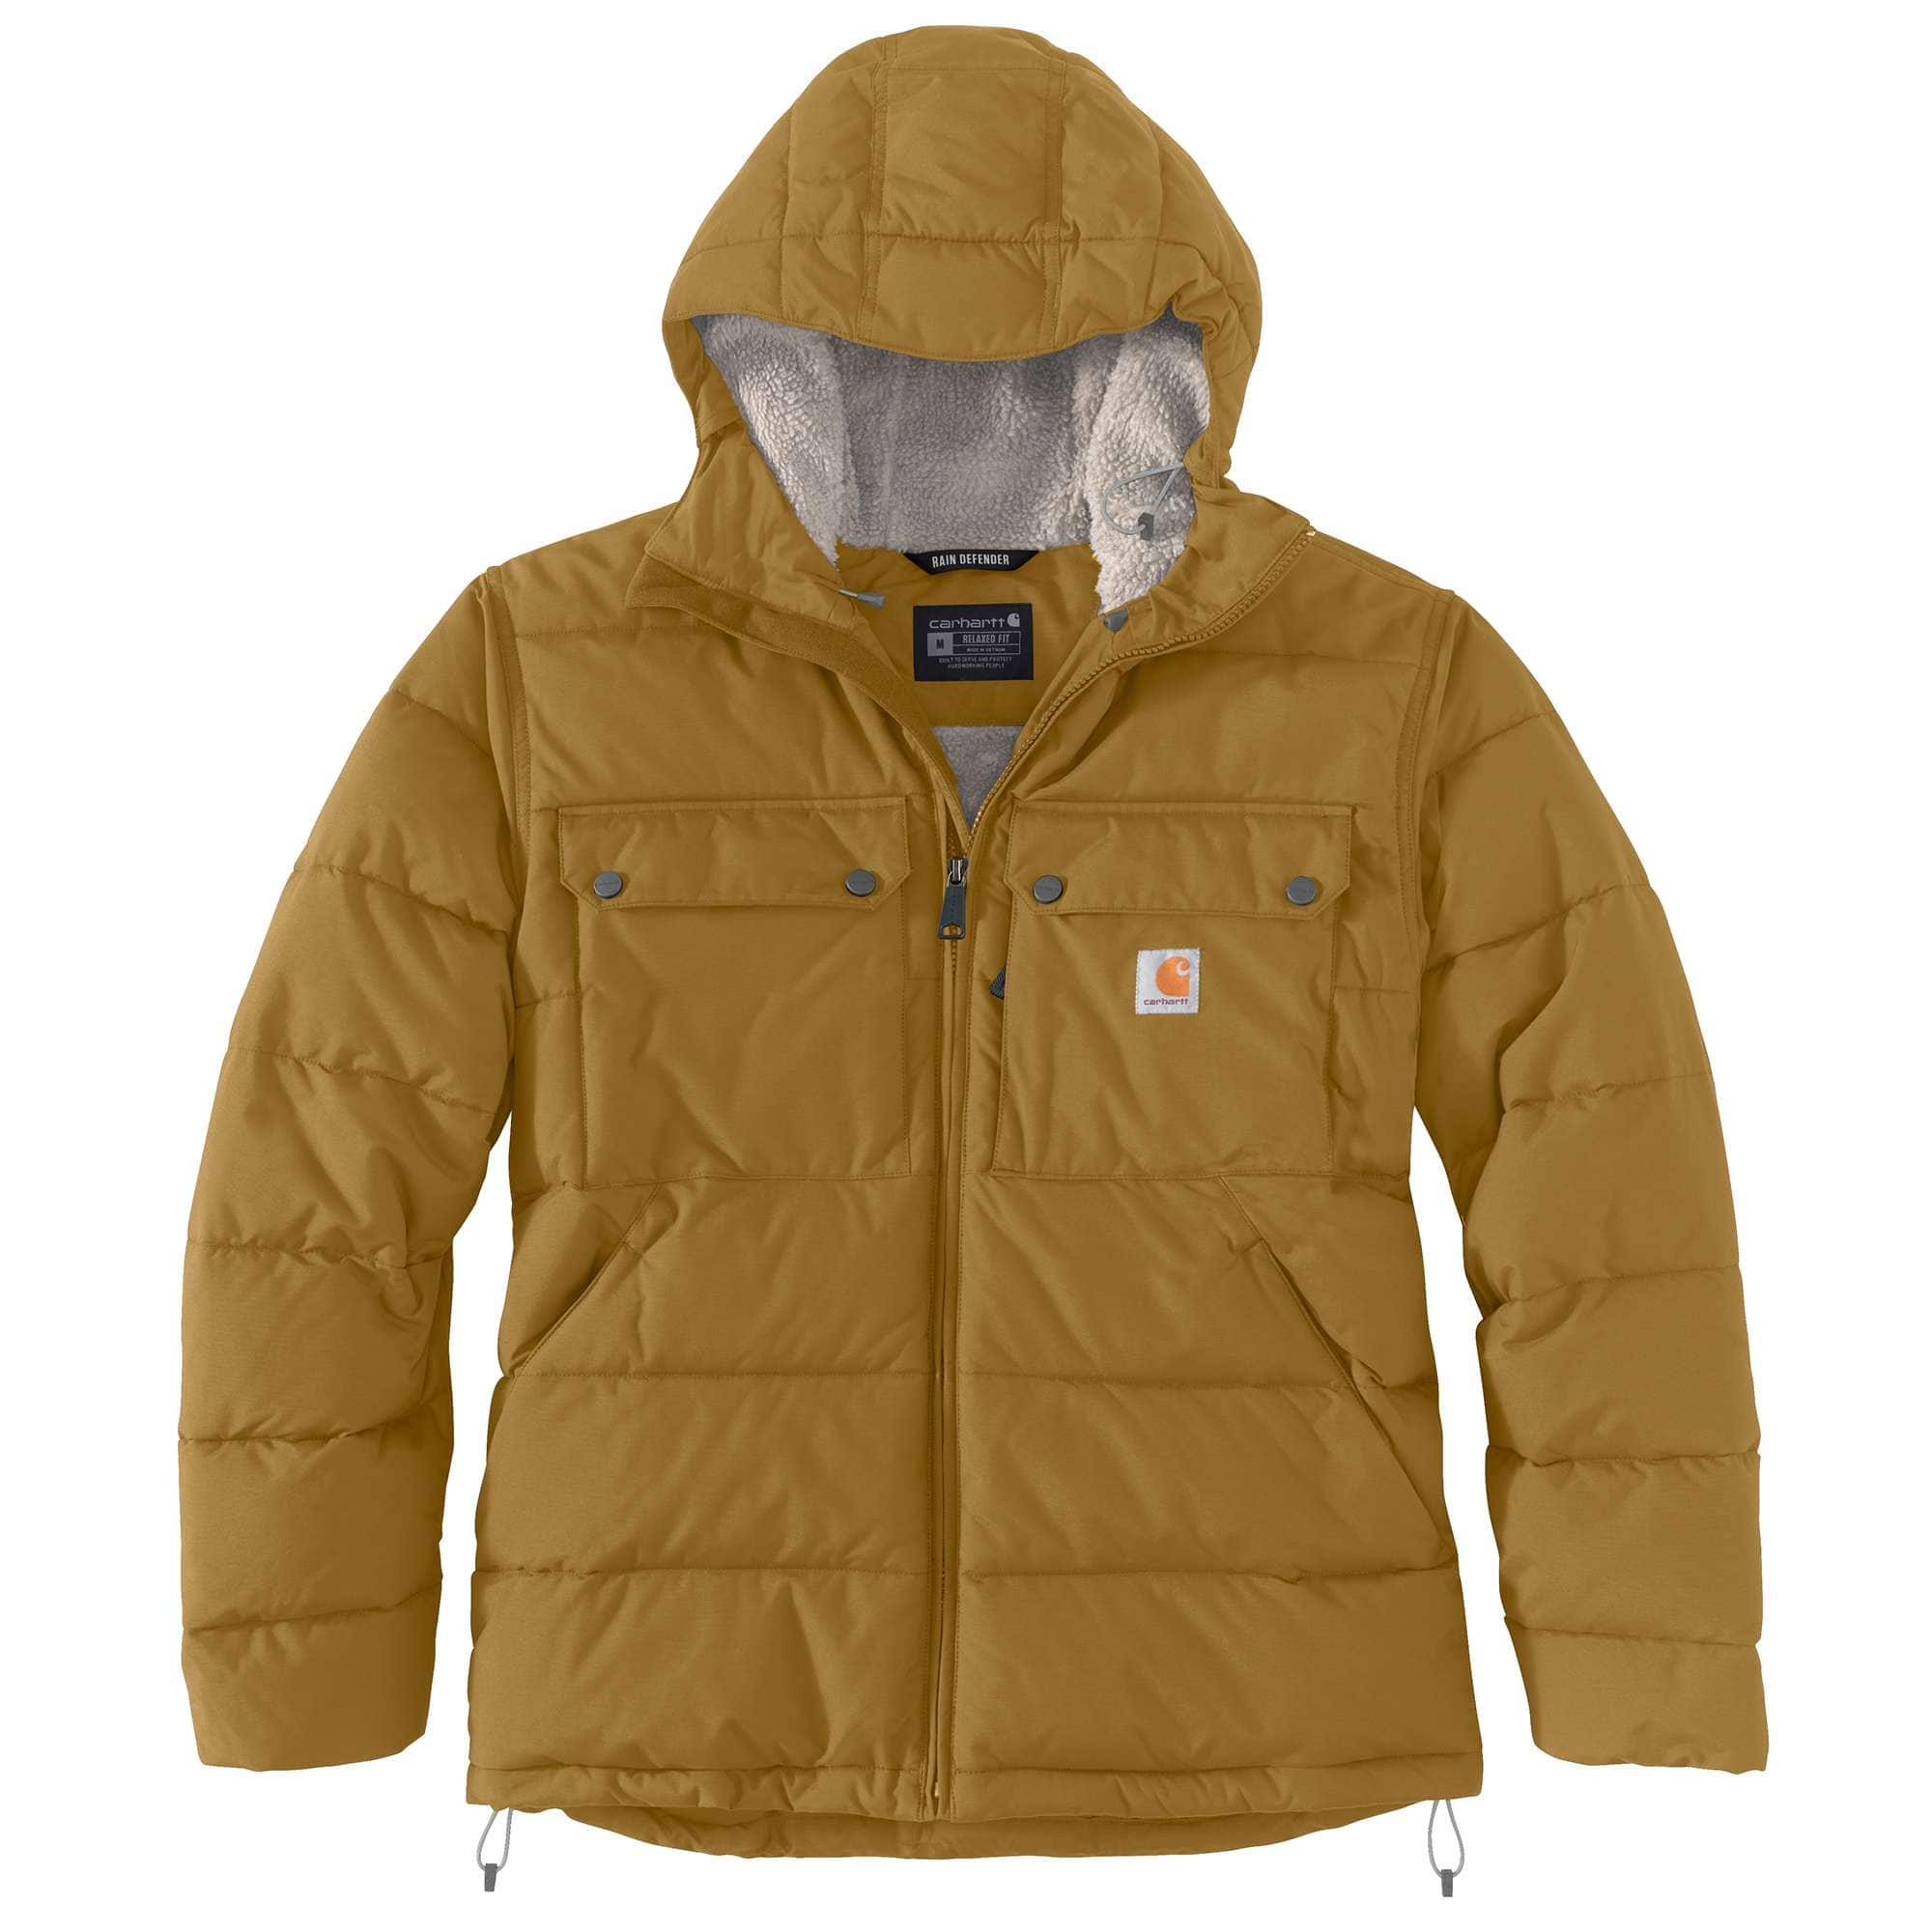 Carhartt Yukon Extremes® Loose Fit Level 4 Extreme Warmth Rating